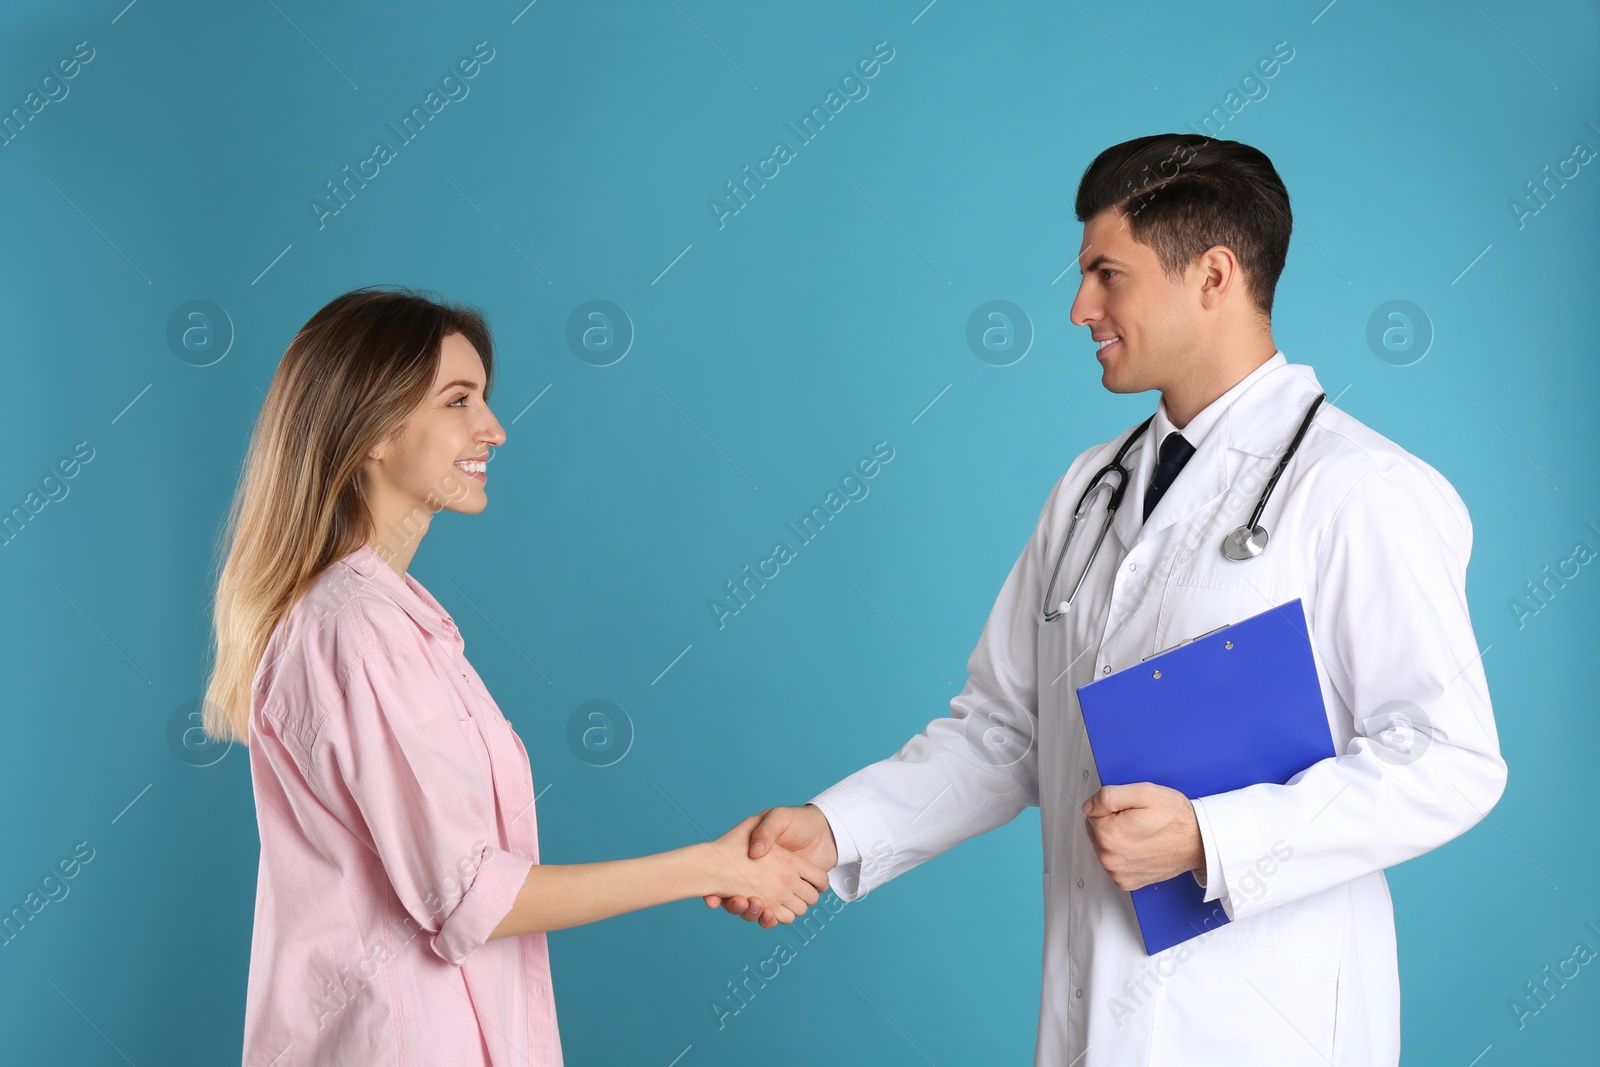 Photo of Doctor and patient shaking hands on light blue background